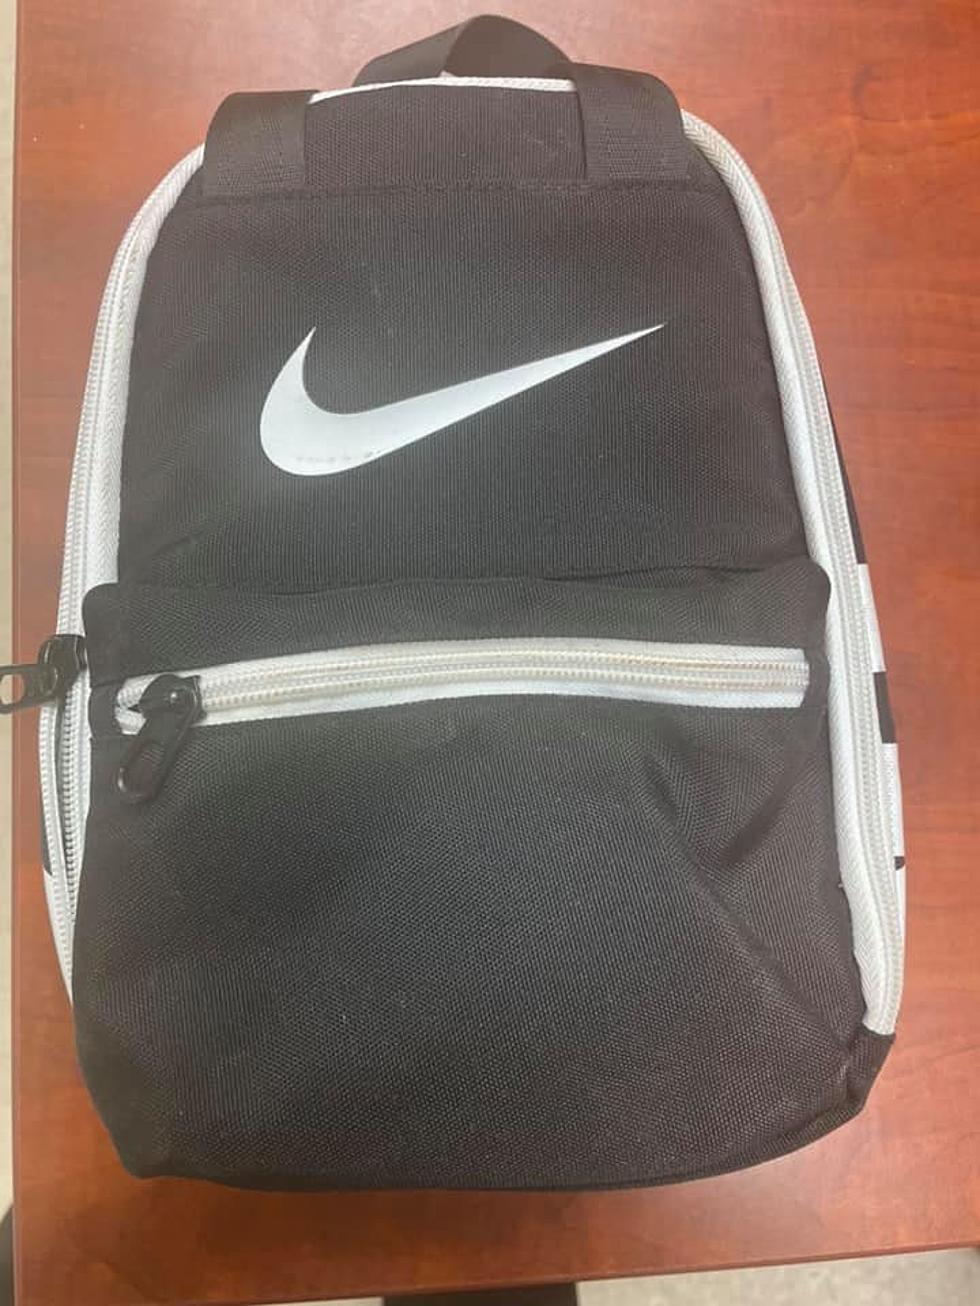 Louisiana Police Want to Reunite Drug-Filled Backpack with Owner